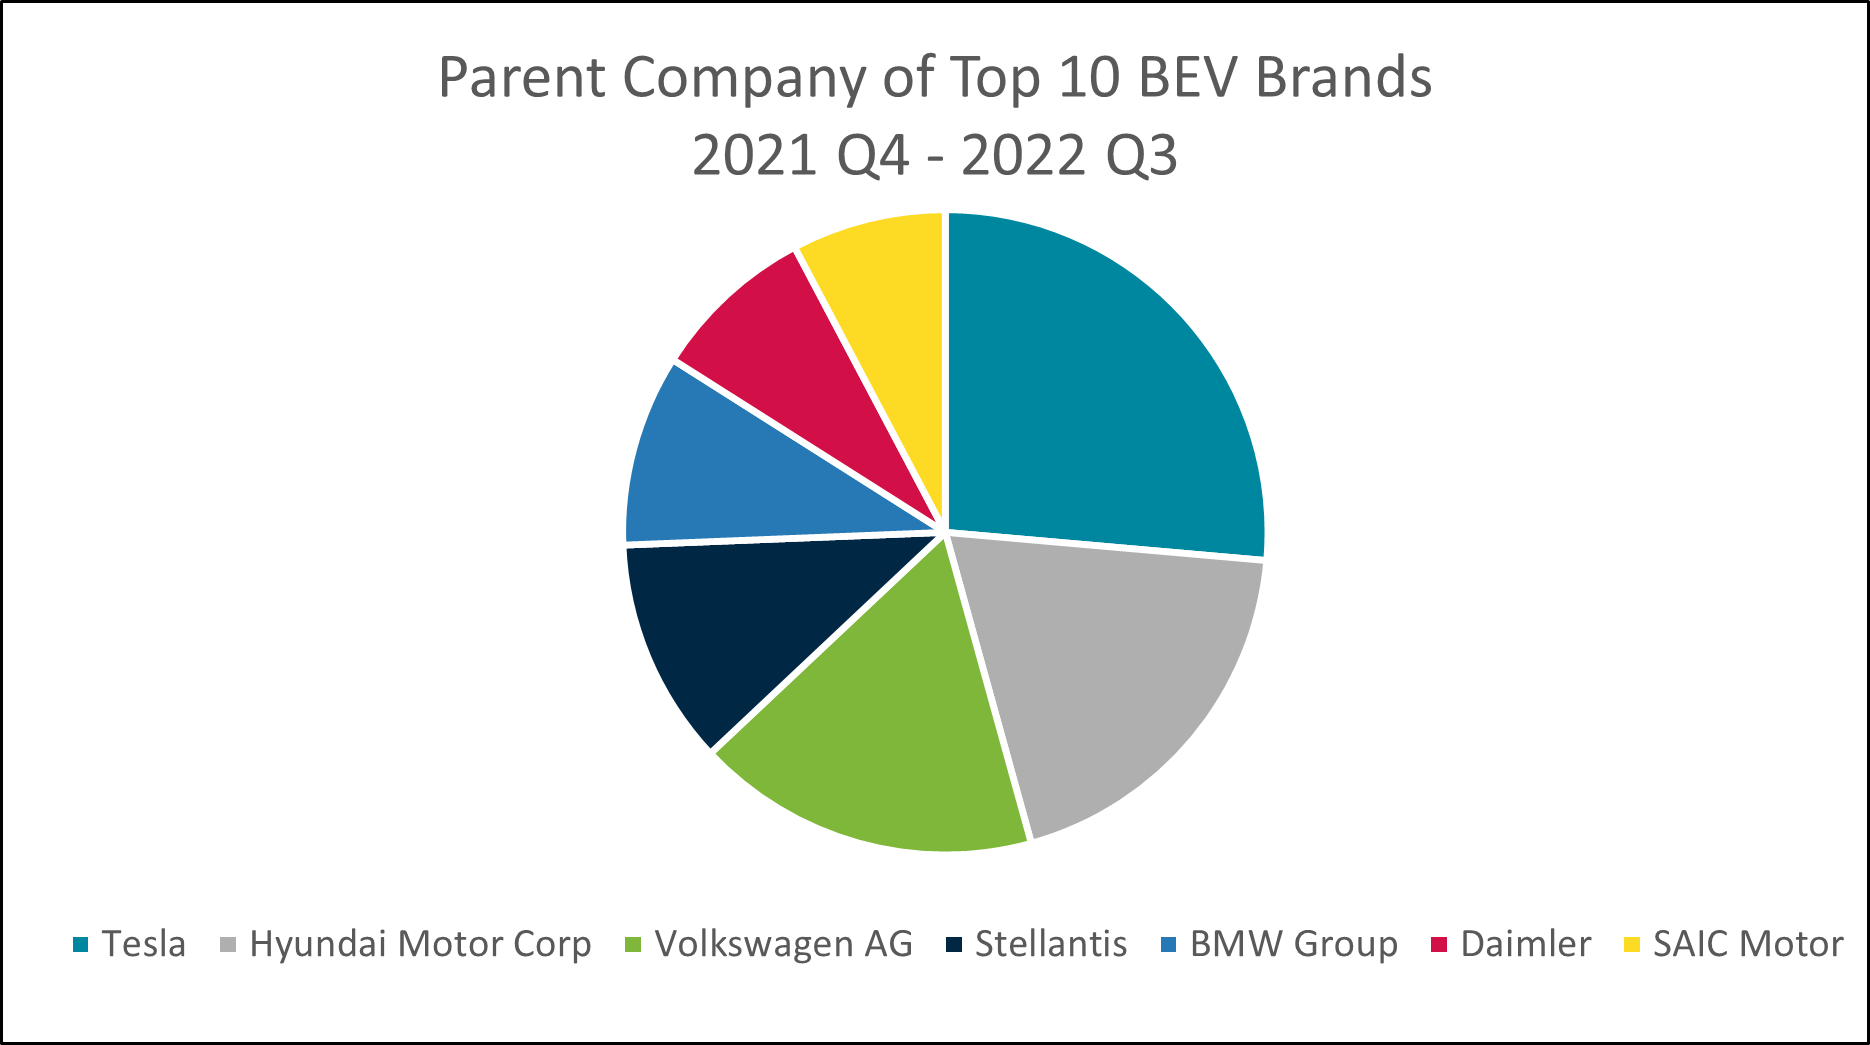 Tesla and Hyundai are the leading Electric Vehicle Parent Brands in the UK